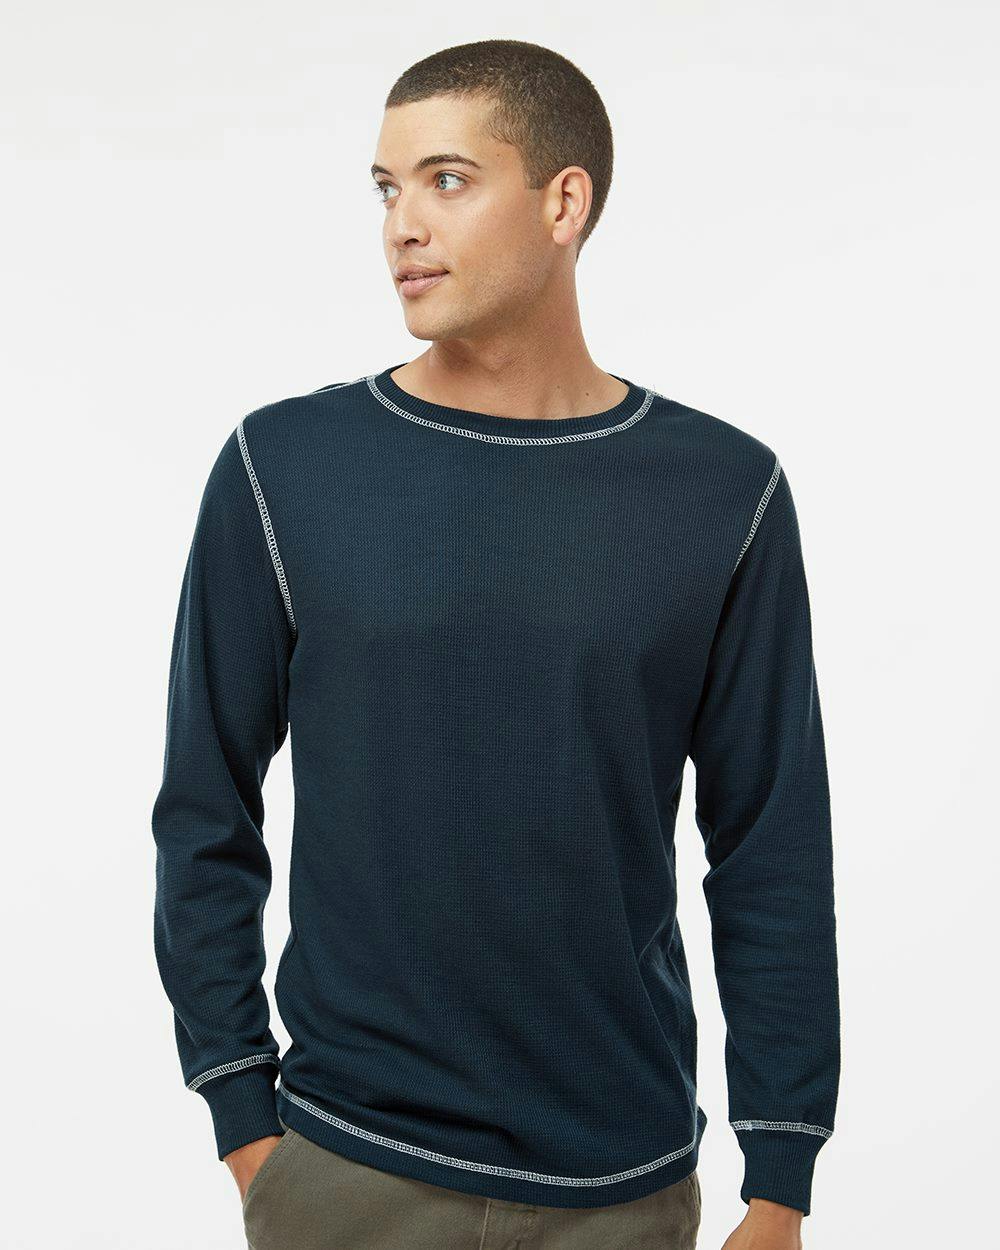 Image for Vintage Thermal Long Sleeve T-Shirt - 8238